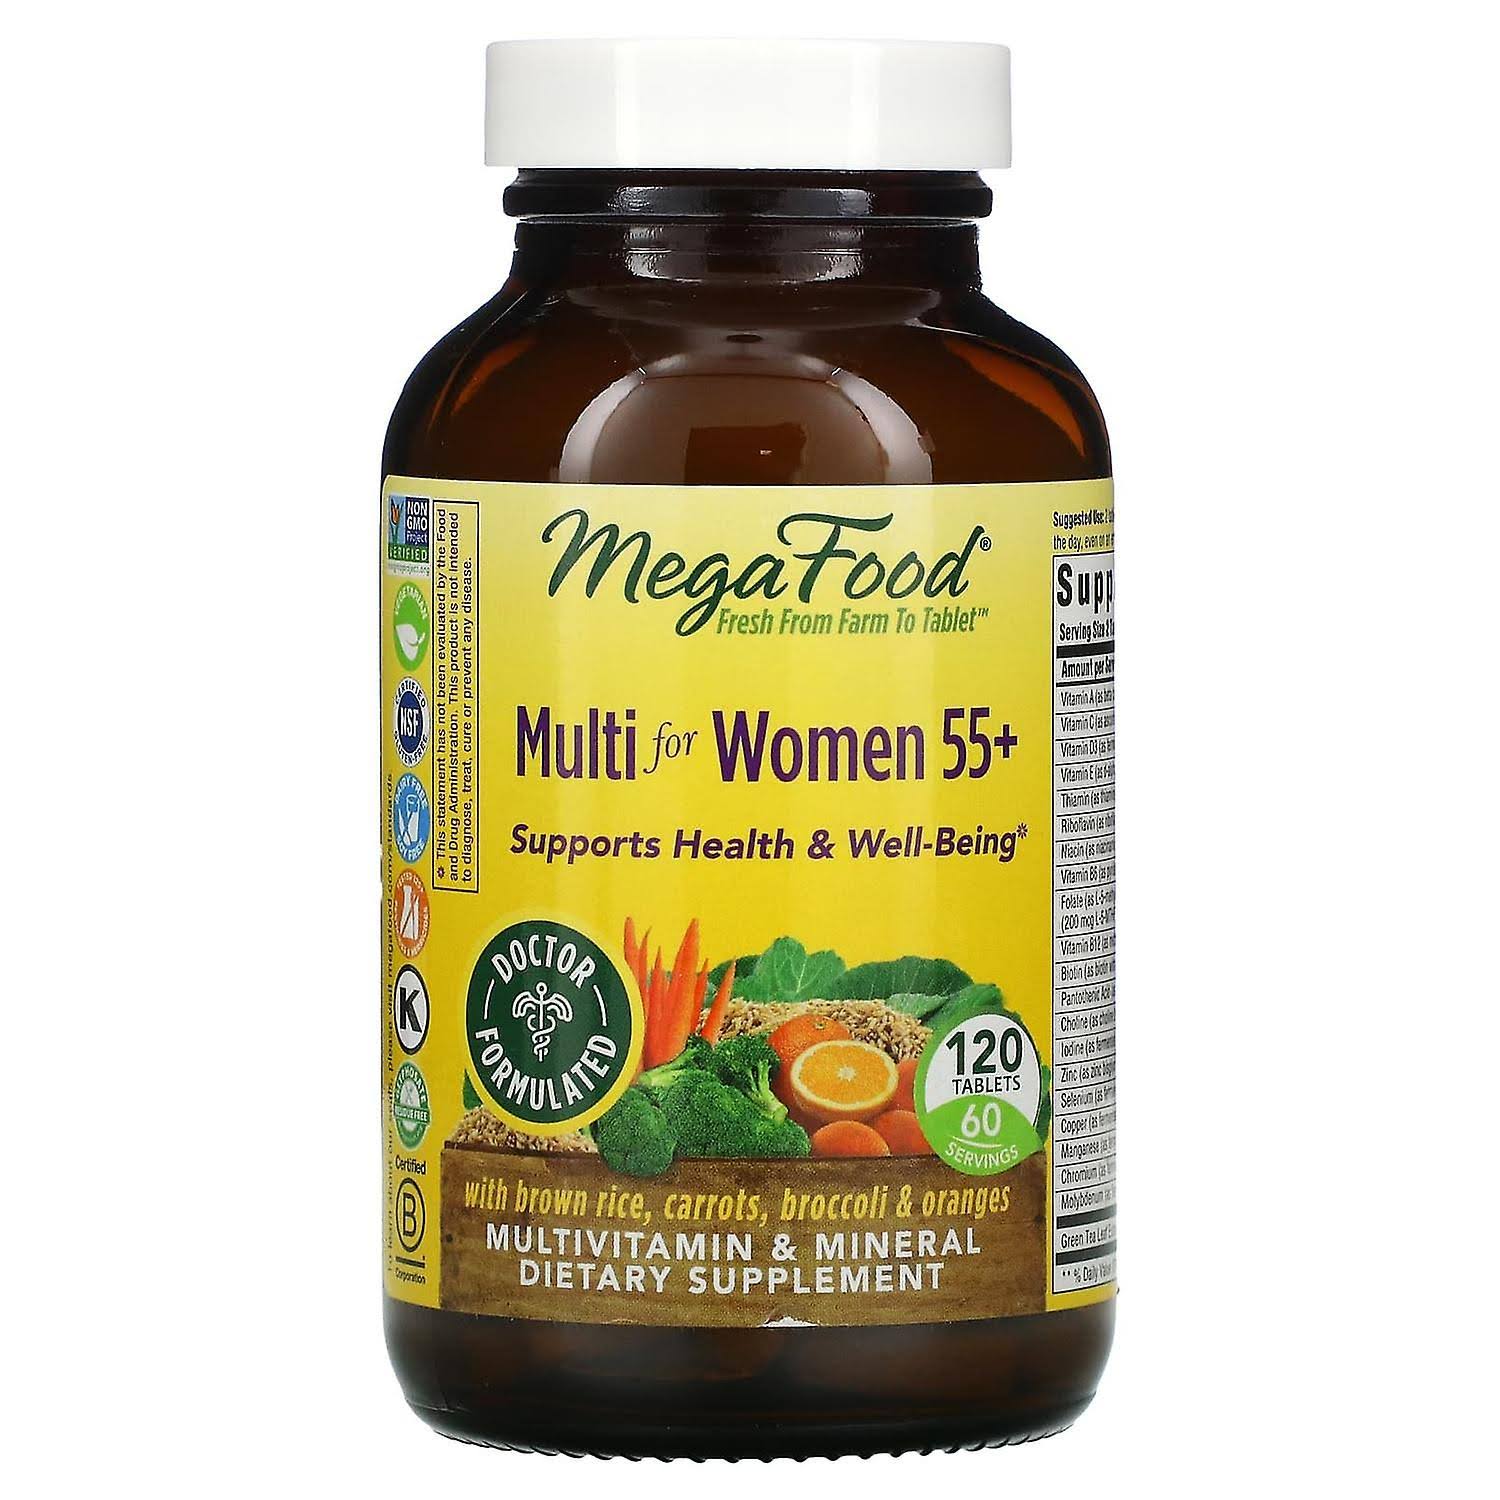 MegaFood Multivitamin & Mineral for Women Over 55 Dietary Supplement - 120 Tablets